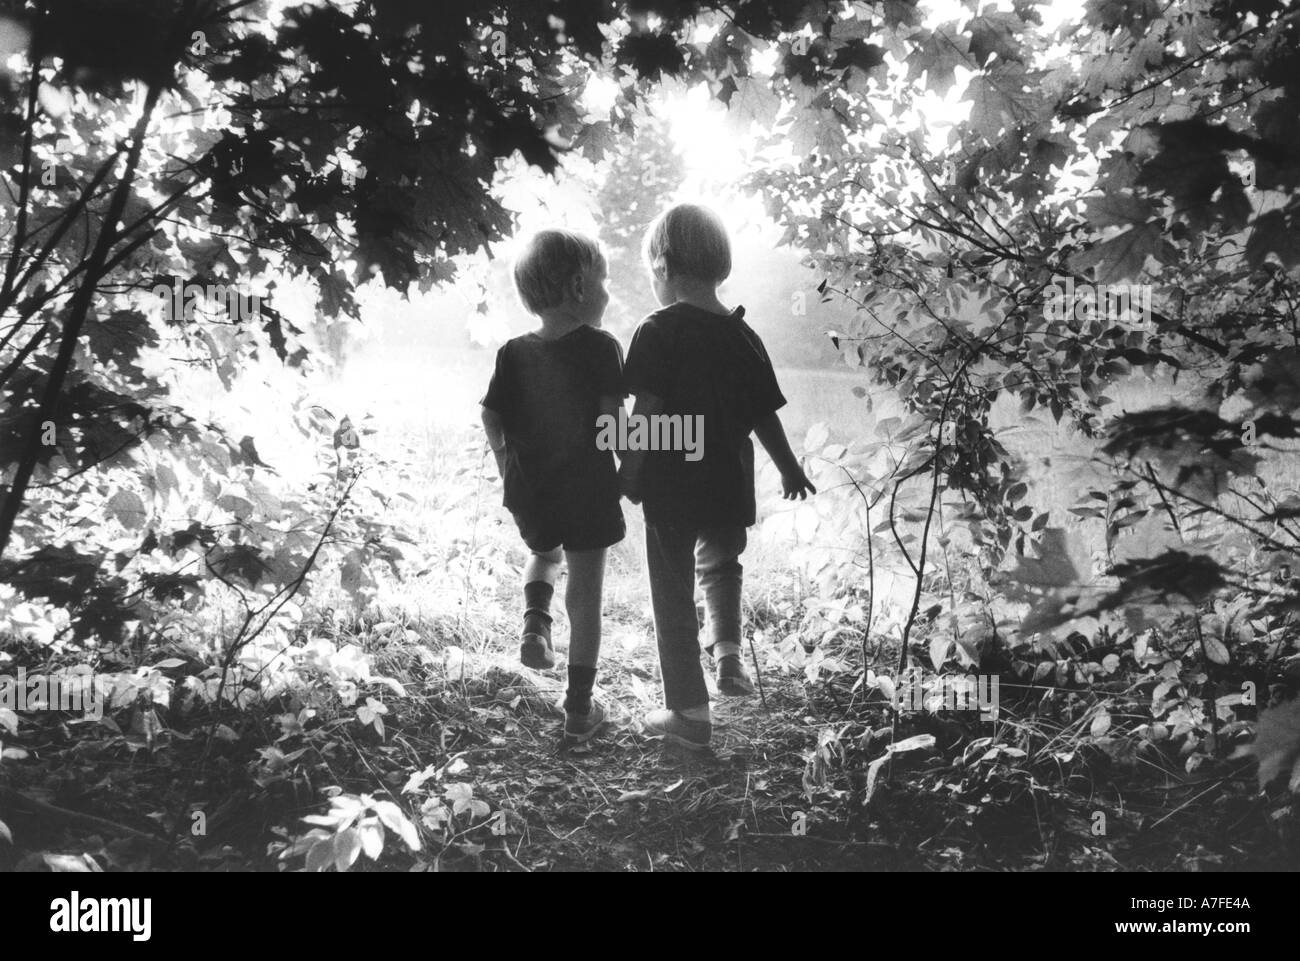 Silhouette of brother and sister walking through the woods together Stock Photo